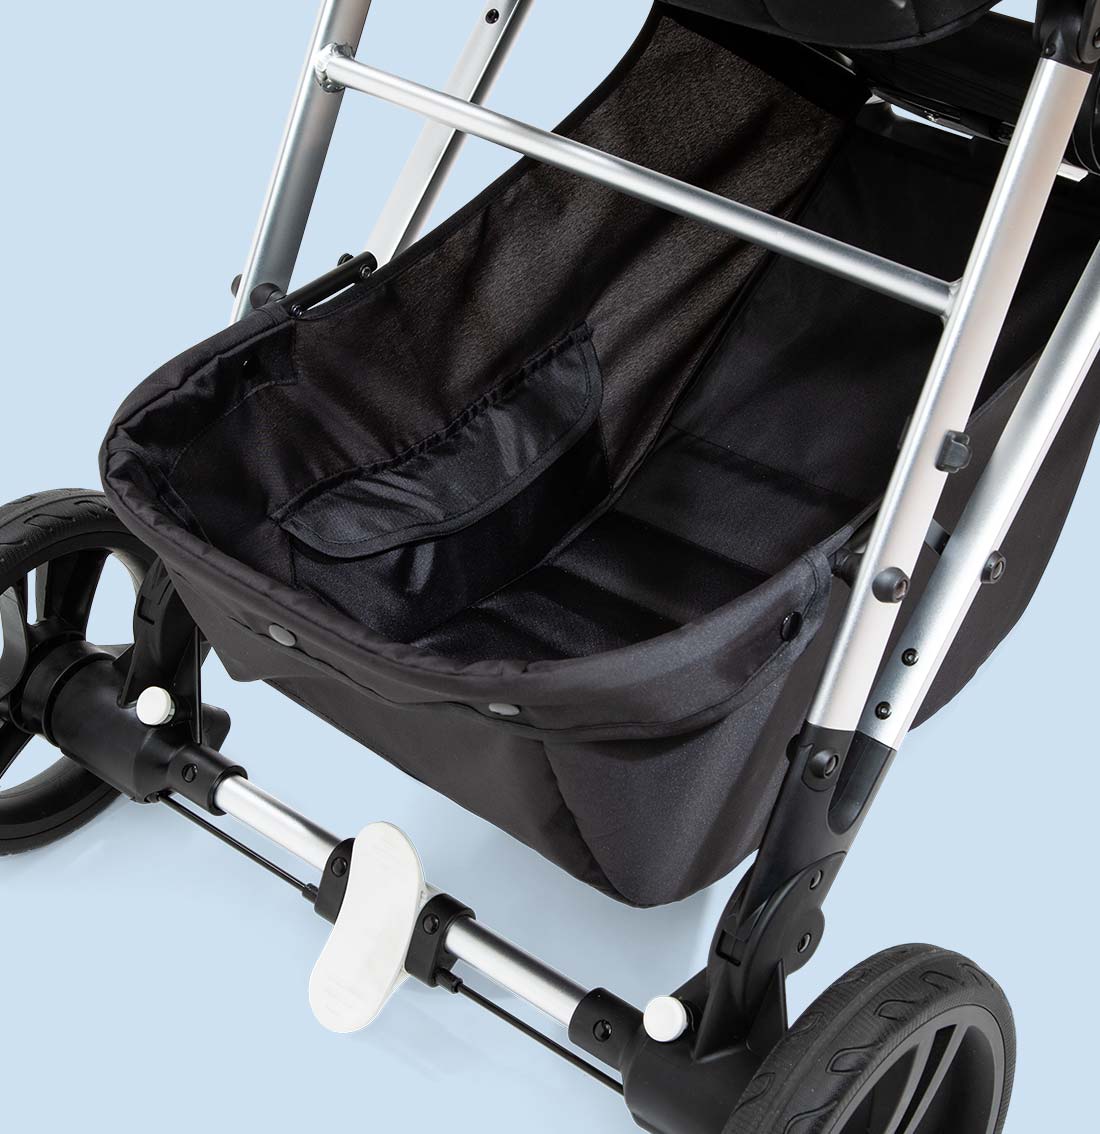 Close-up of a black and silver baby stroller on a light blue background, focusing on the seat and front wheels.